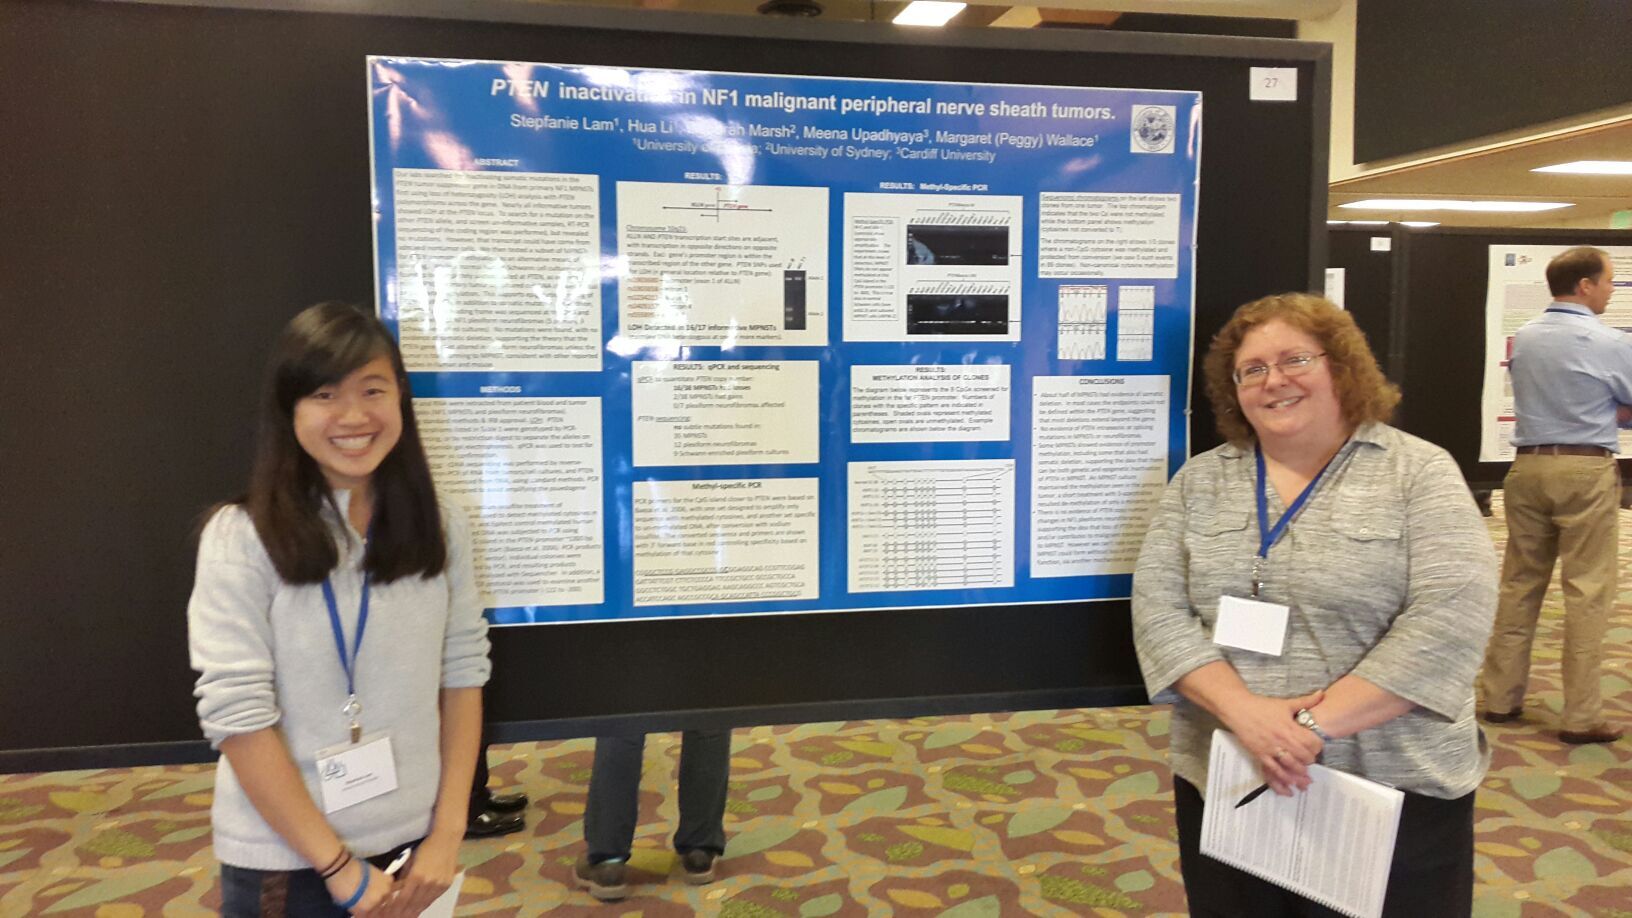 Two individuals stand in front of a scientific poster presentation titled "PTEN Inactivation in NF1 Malignant Peripheral Nerve Sheath Tumors." The poster includes text, charts, and images.